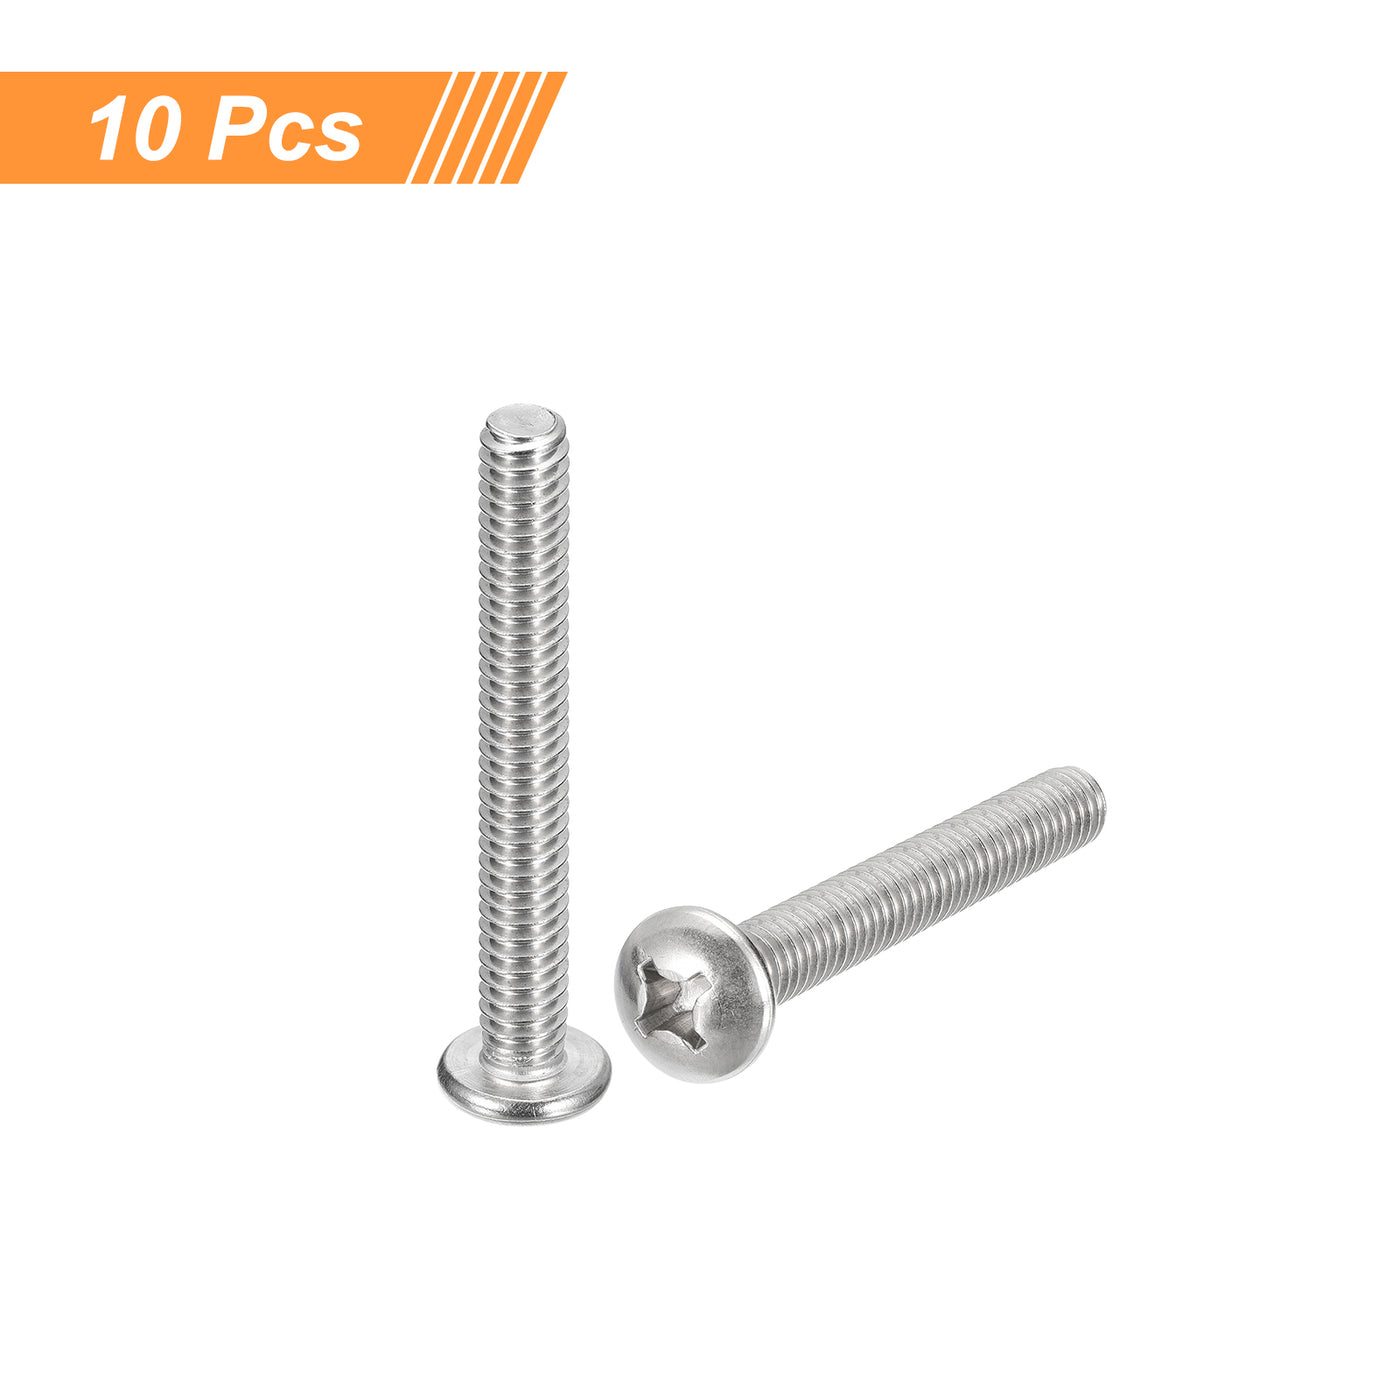 uxcell Uxcell 1/4-20x4" Pan Head Machine Screws, Stainless Steel 18-8 Screw, Pack of 10